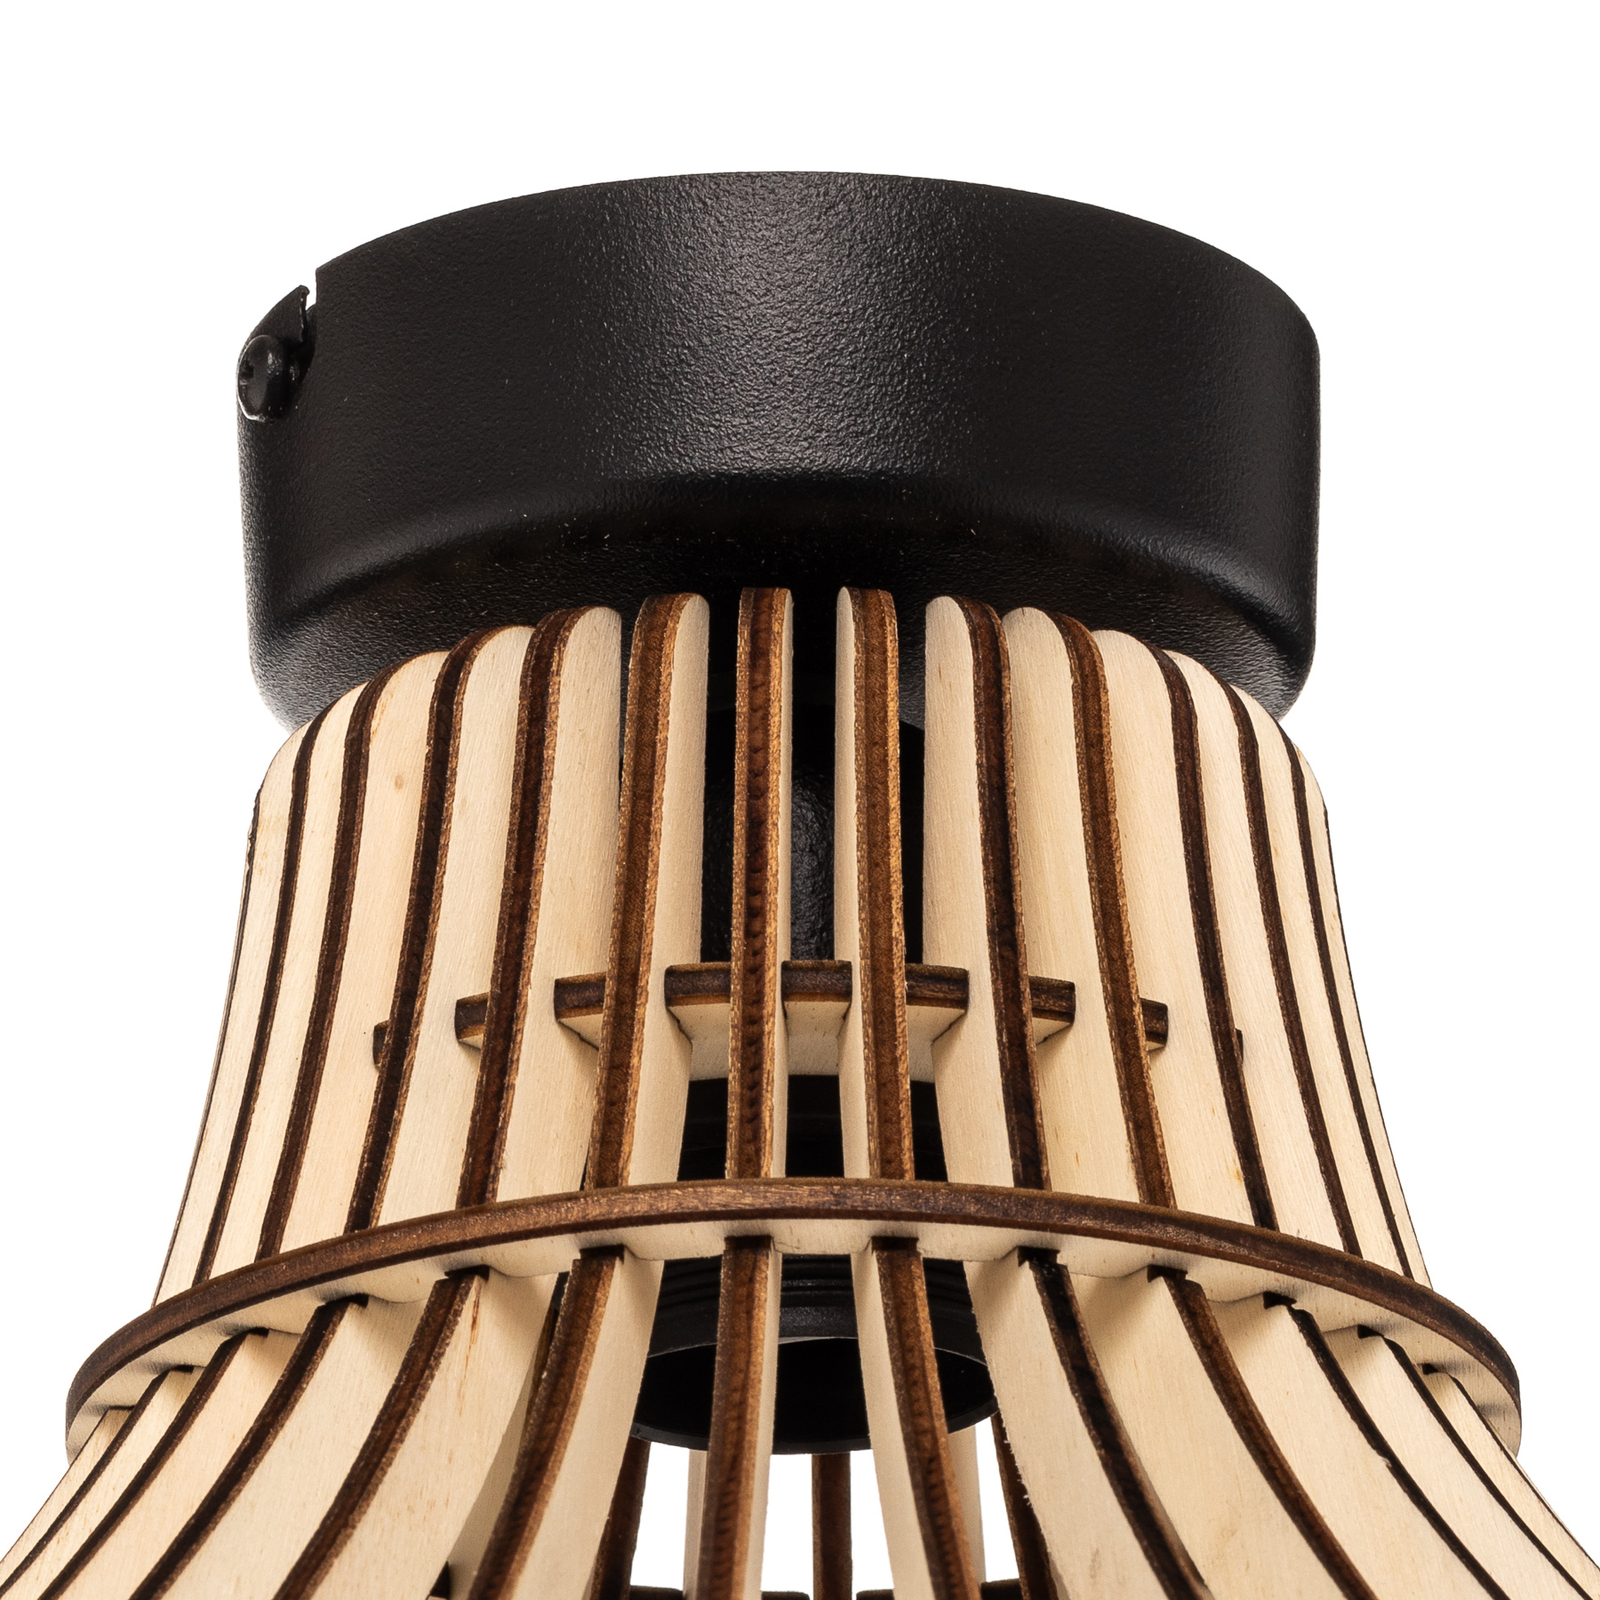 Barrel ceiling light with a wooden lampshade